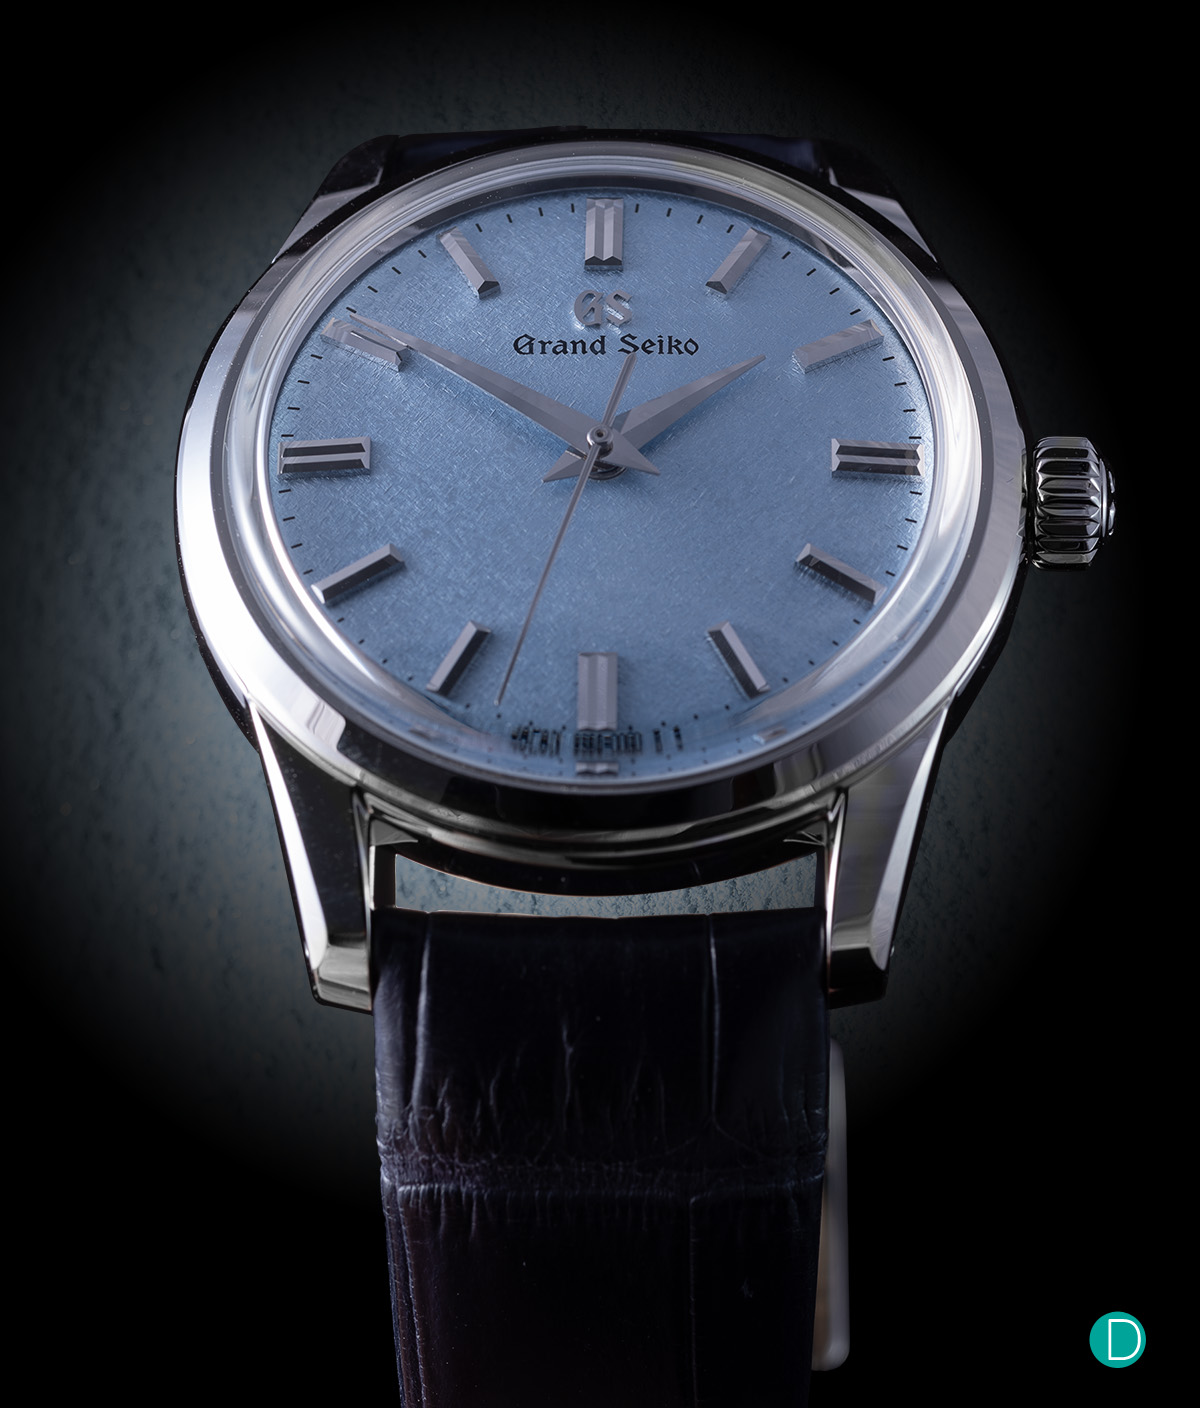 Review: The new Grand Seiko SBGW283